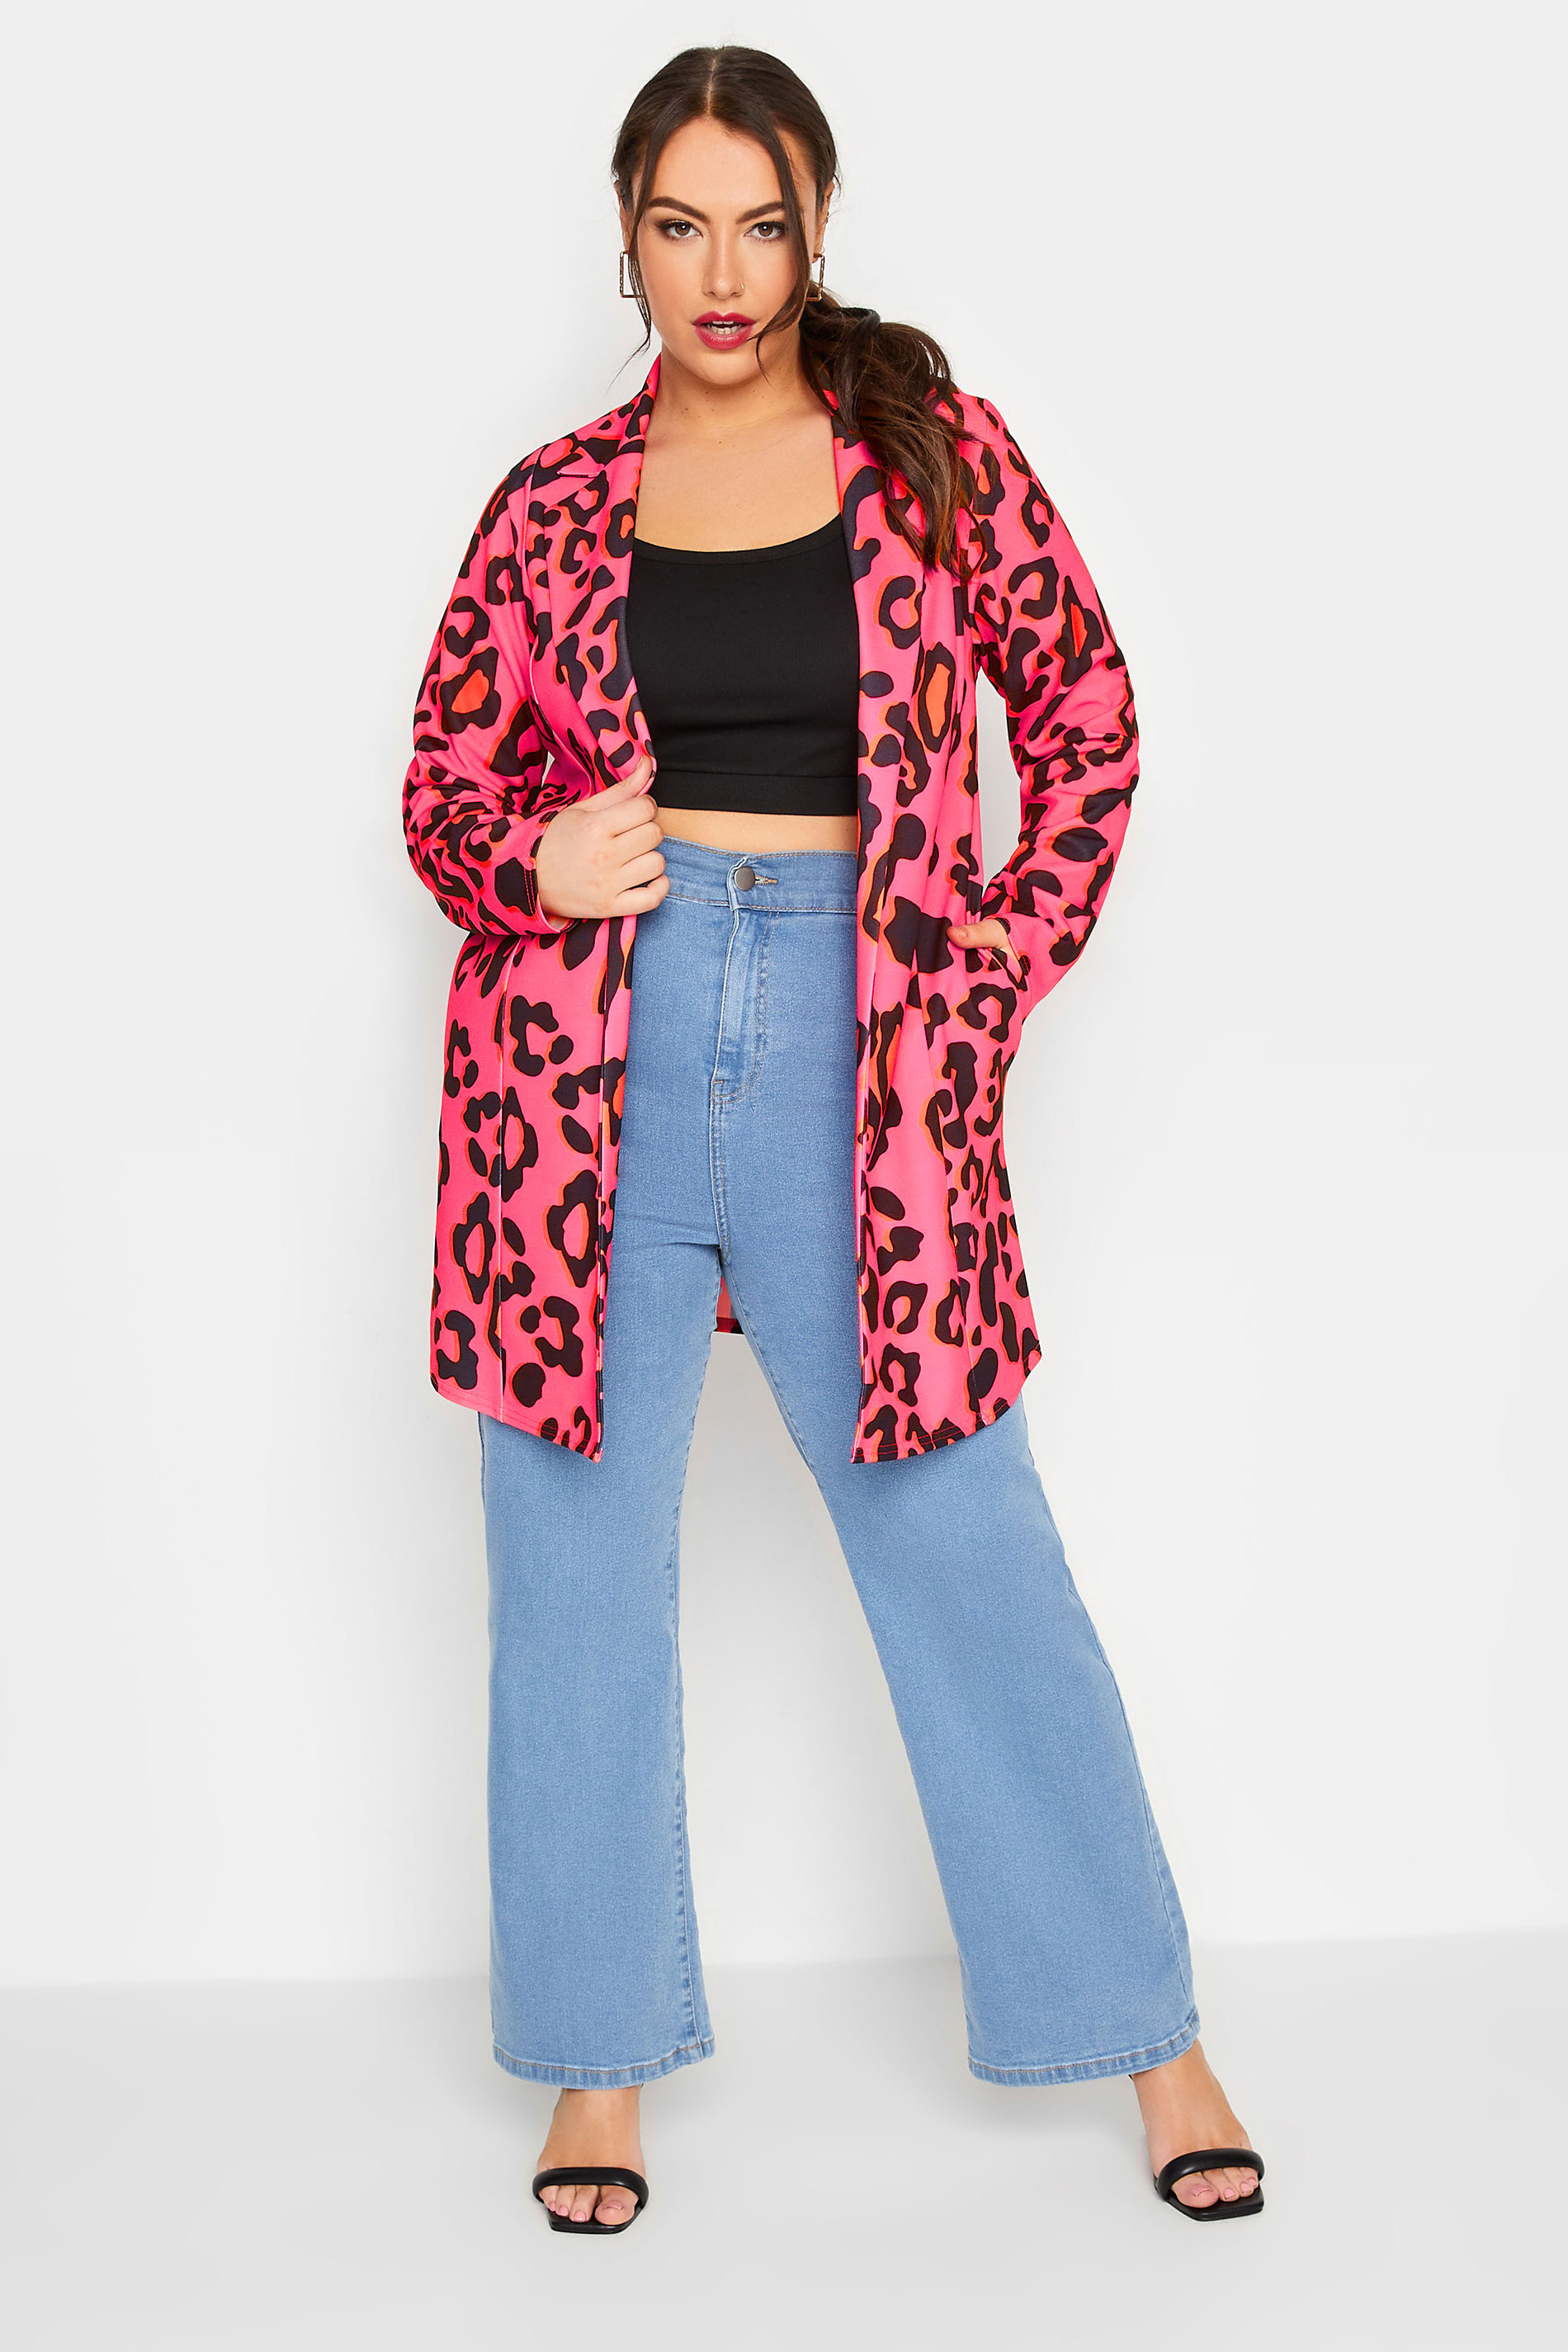 LIMITED COLLECTION Plus Size Curve Hot Pink Leopard Print Blazer | Yours Clothing  3